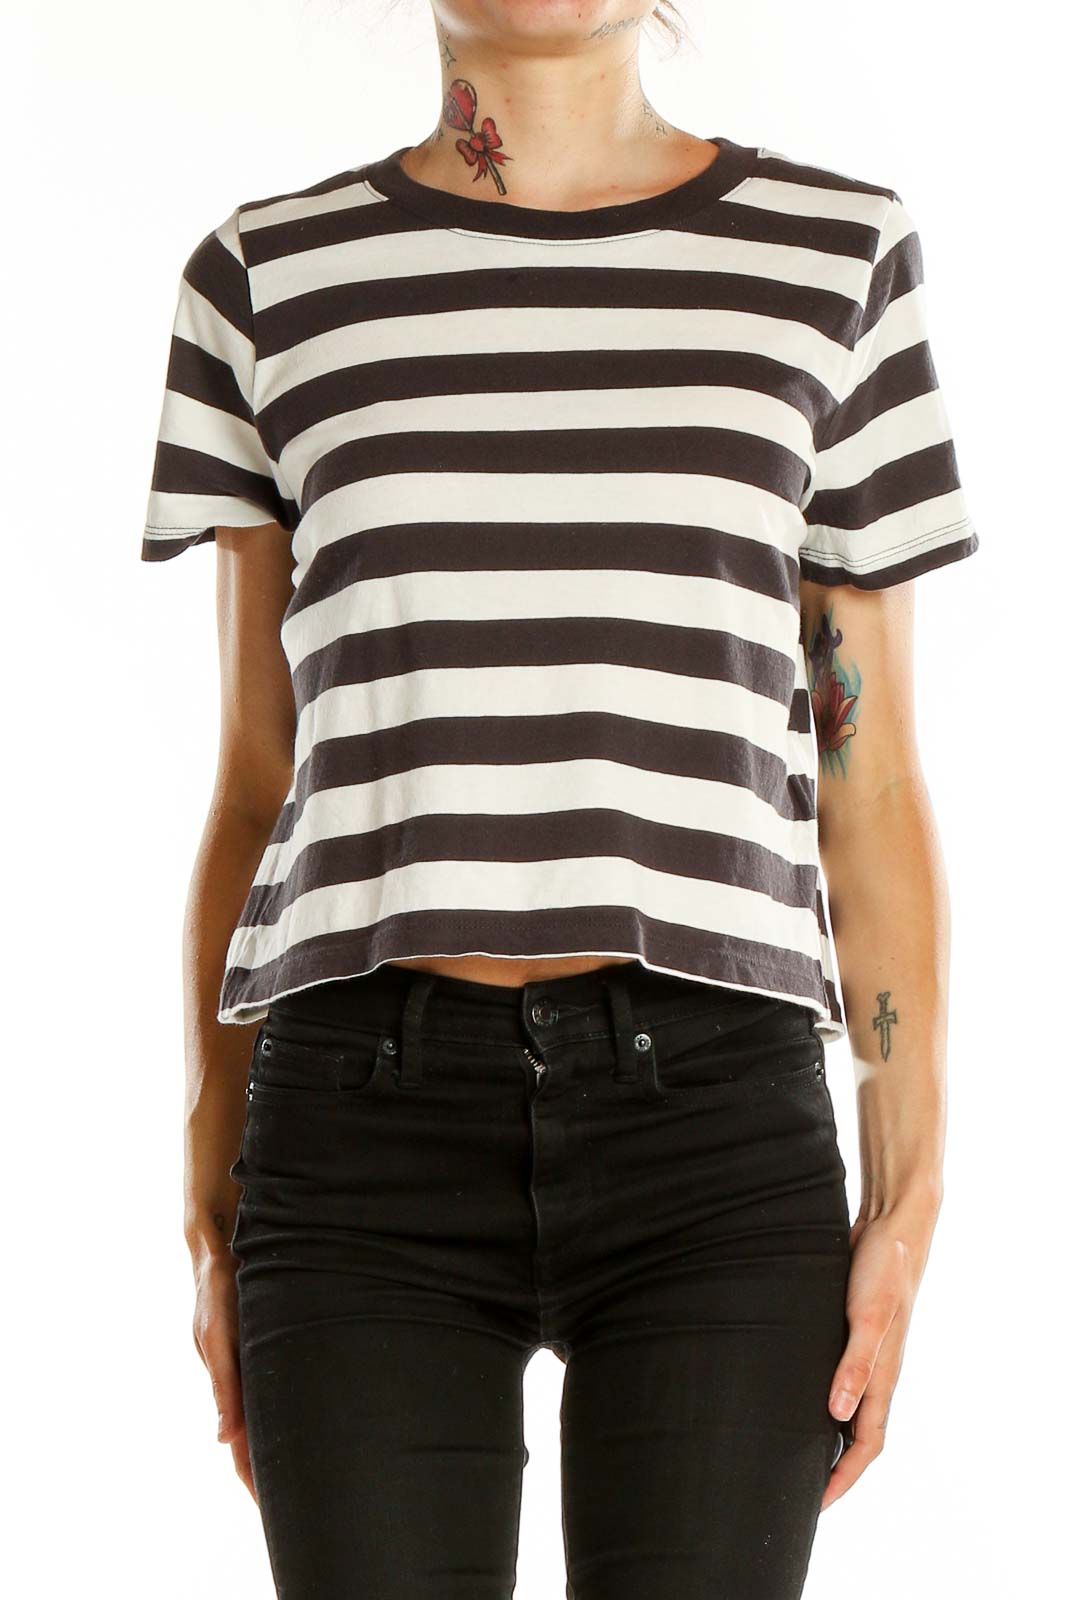 Brown White Striped T-Shirt Front